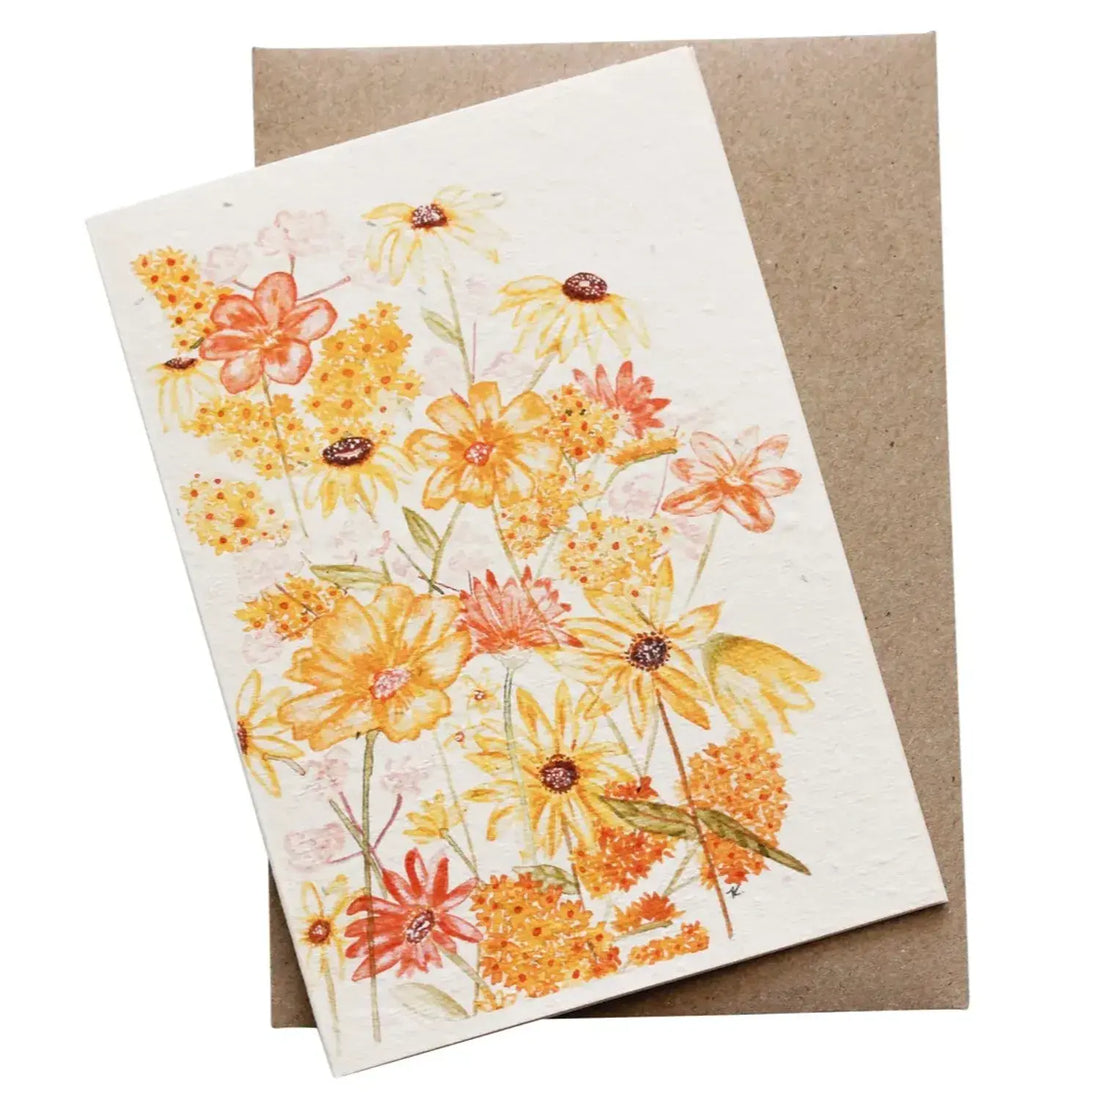 Greeting Card that grows flowers by Hello Petal - Shades of Sunshine Sunshine 